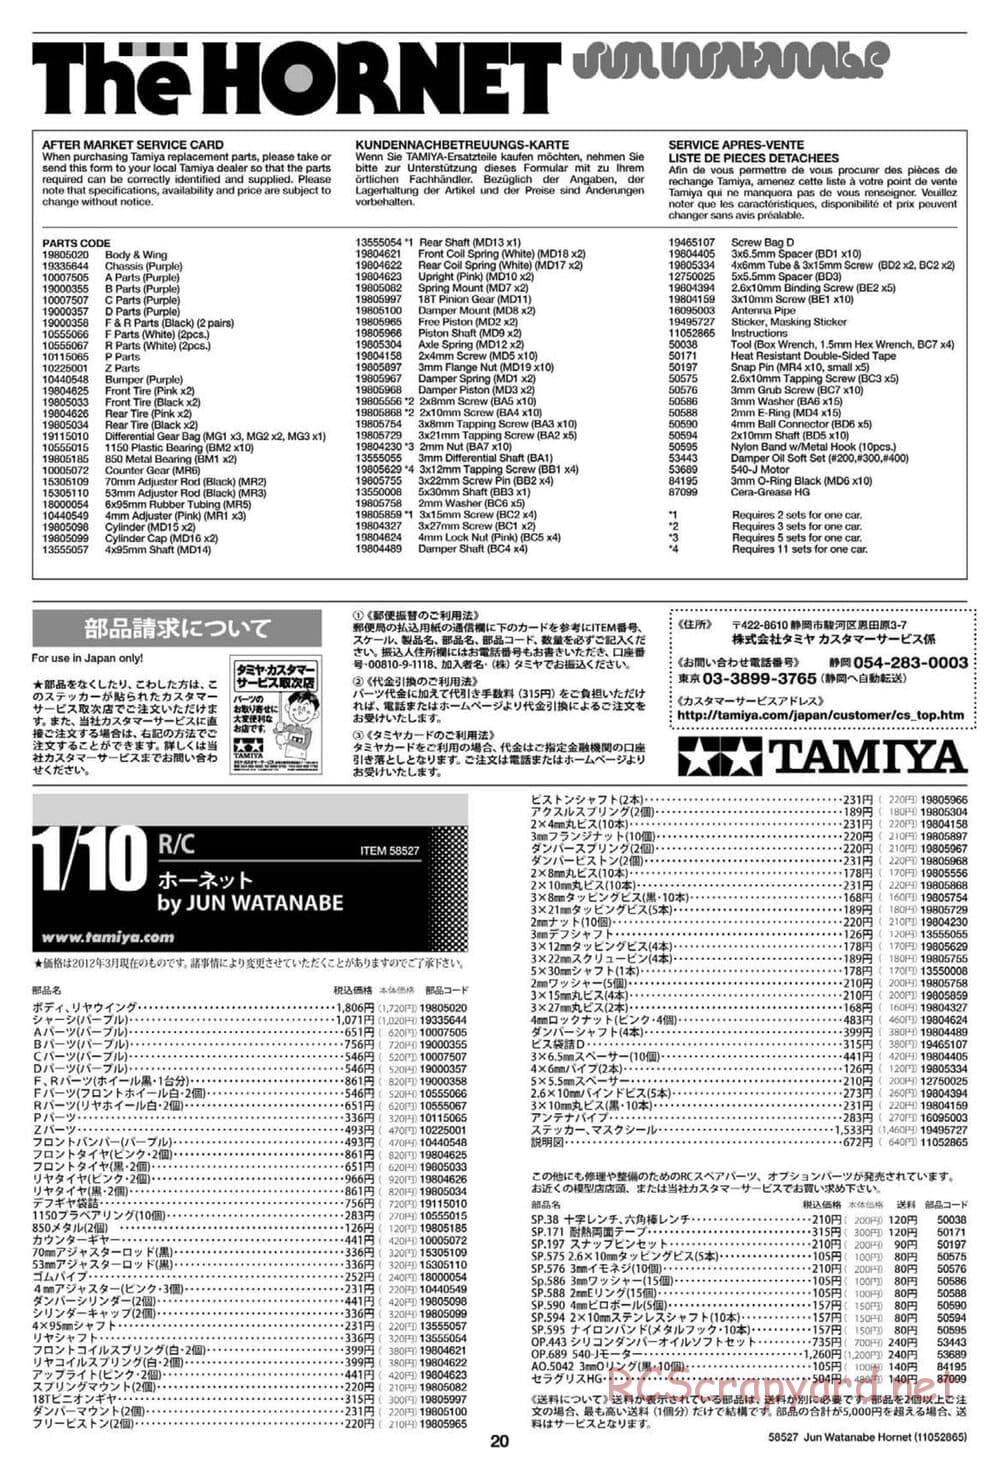 Tamiya - The Hornet by Jun Watanabe - GH Chassis - Manual - Page 20